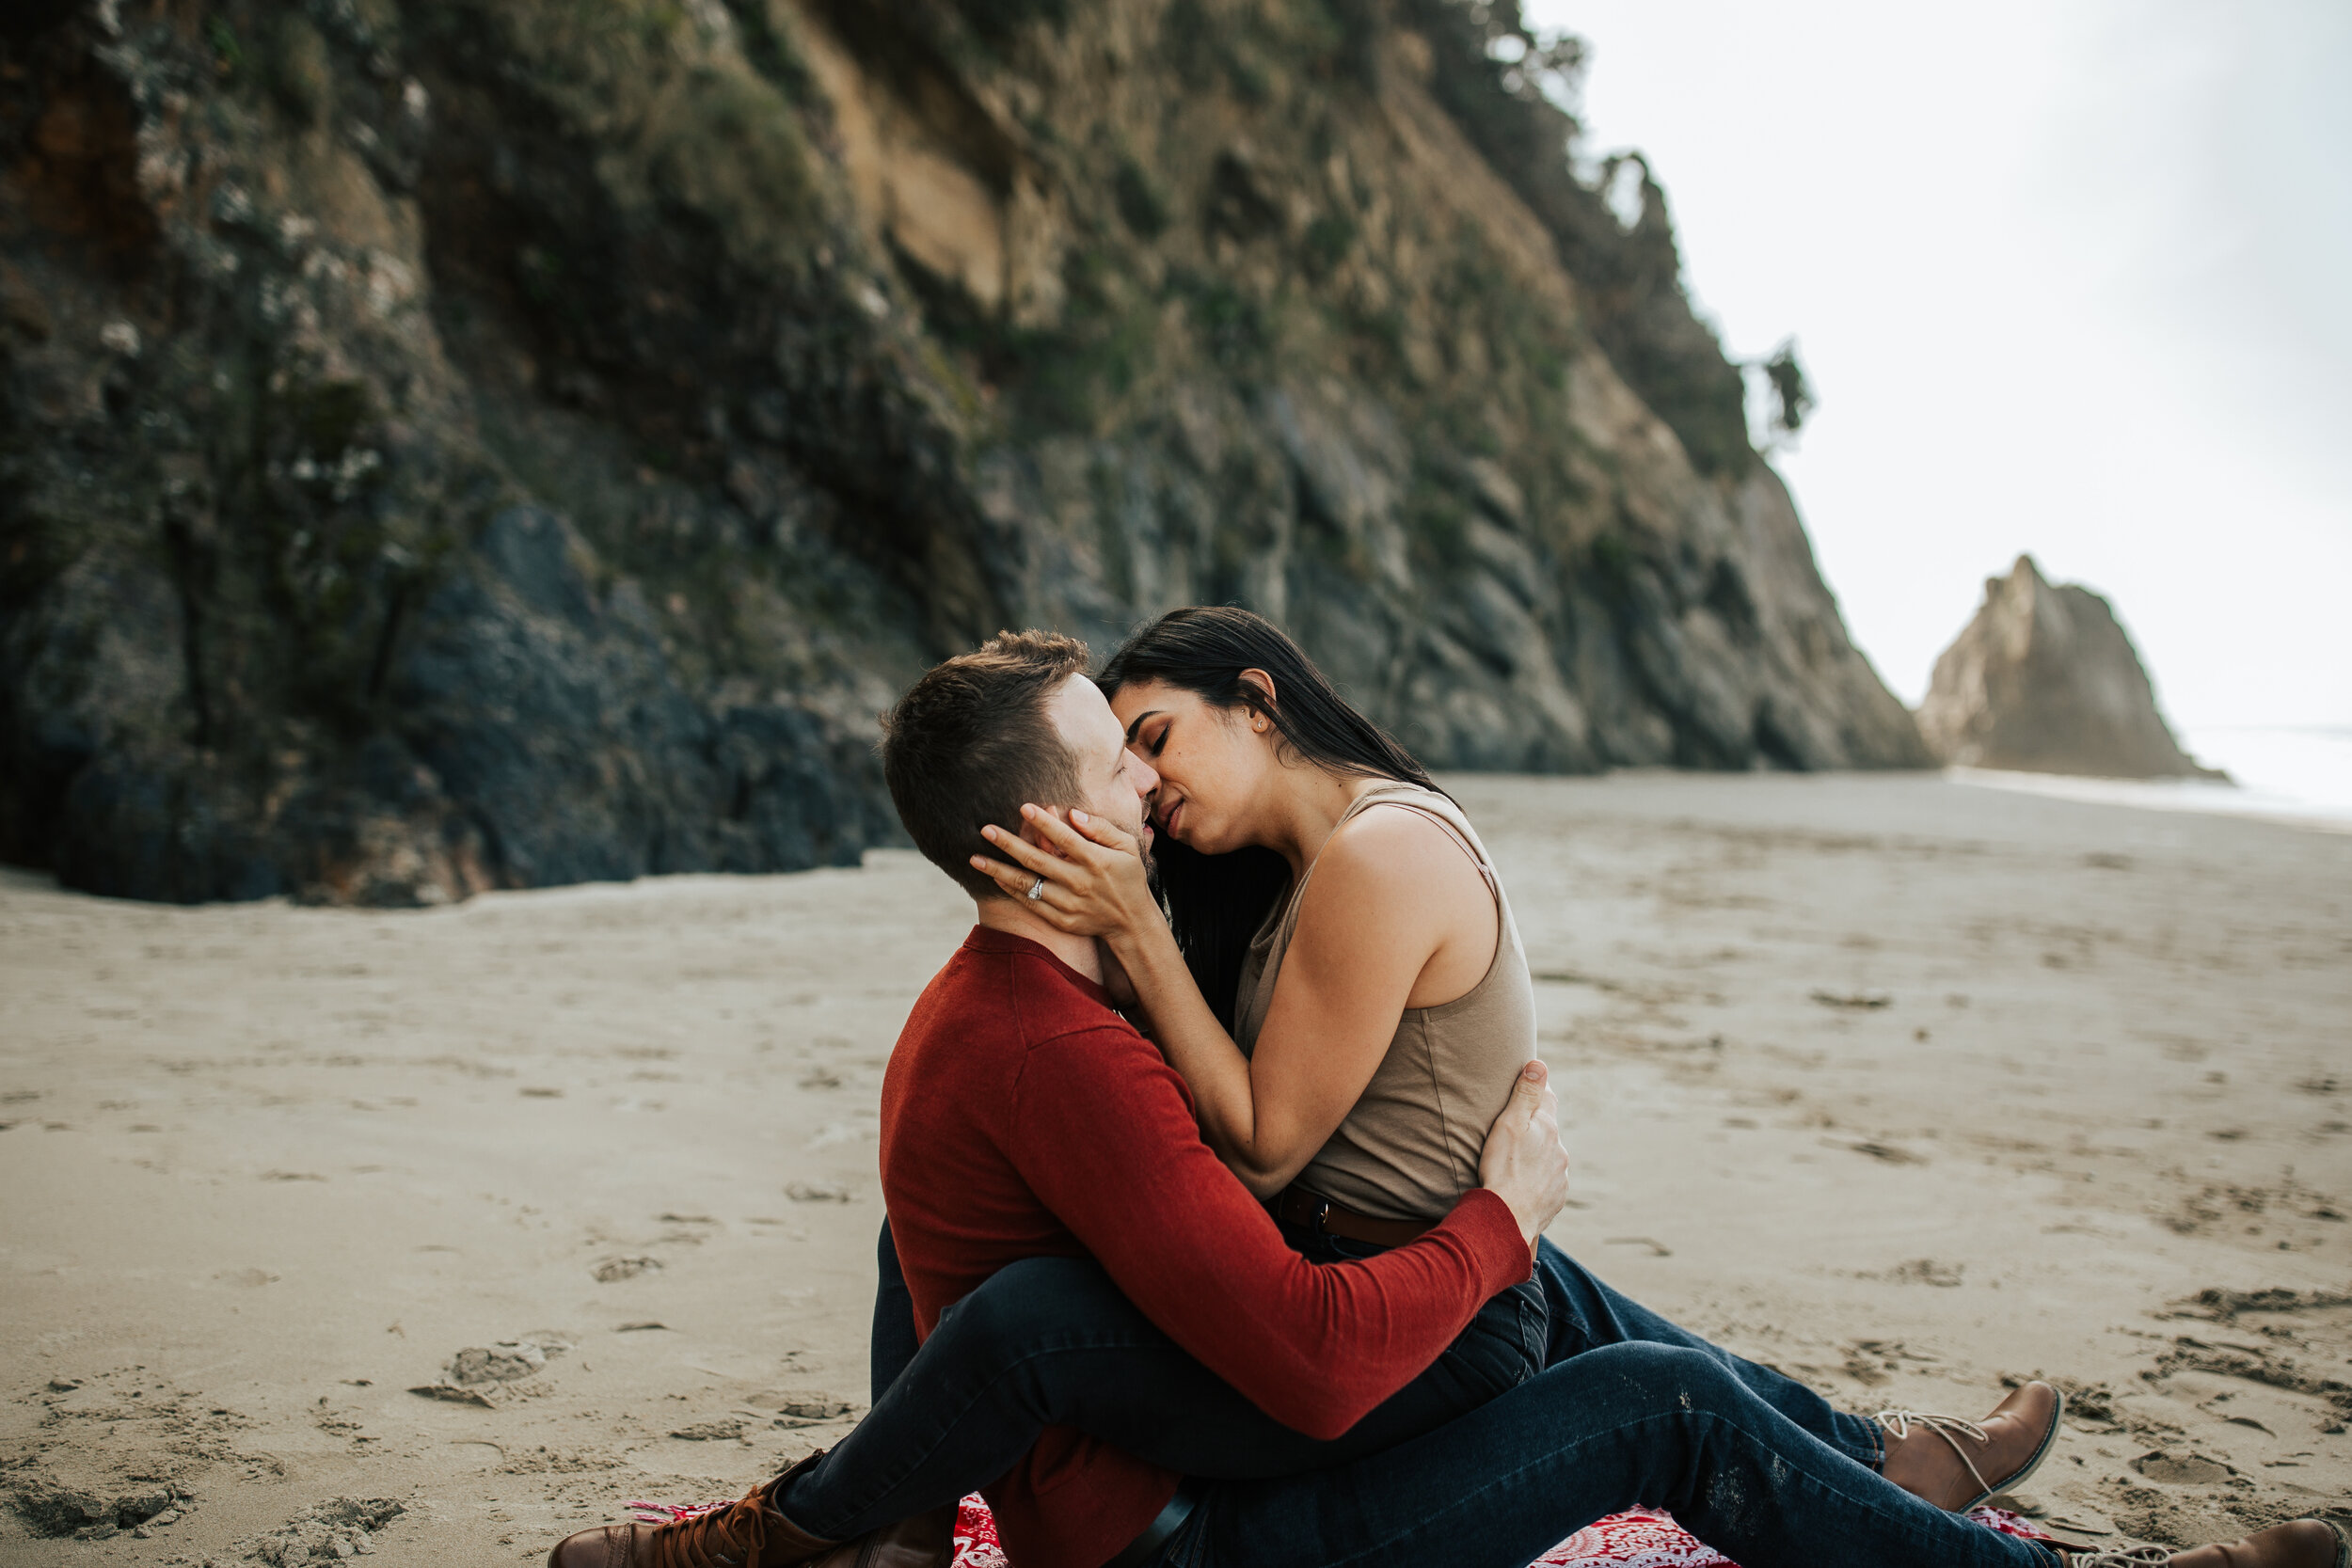 Oregon coast engagement session kissing cute adventurous couples shoot at Hug Point in the PNW beach engagements #oregonphotographer #engagements 